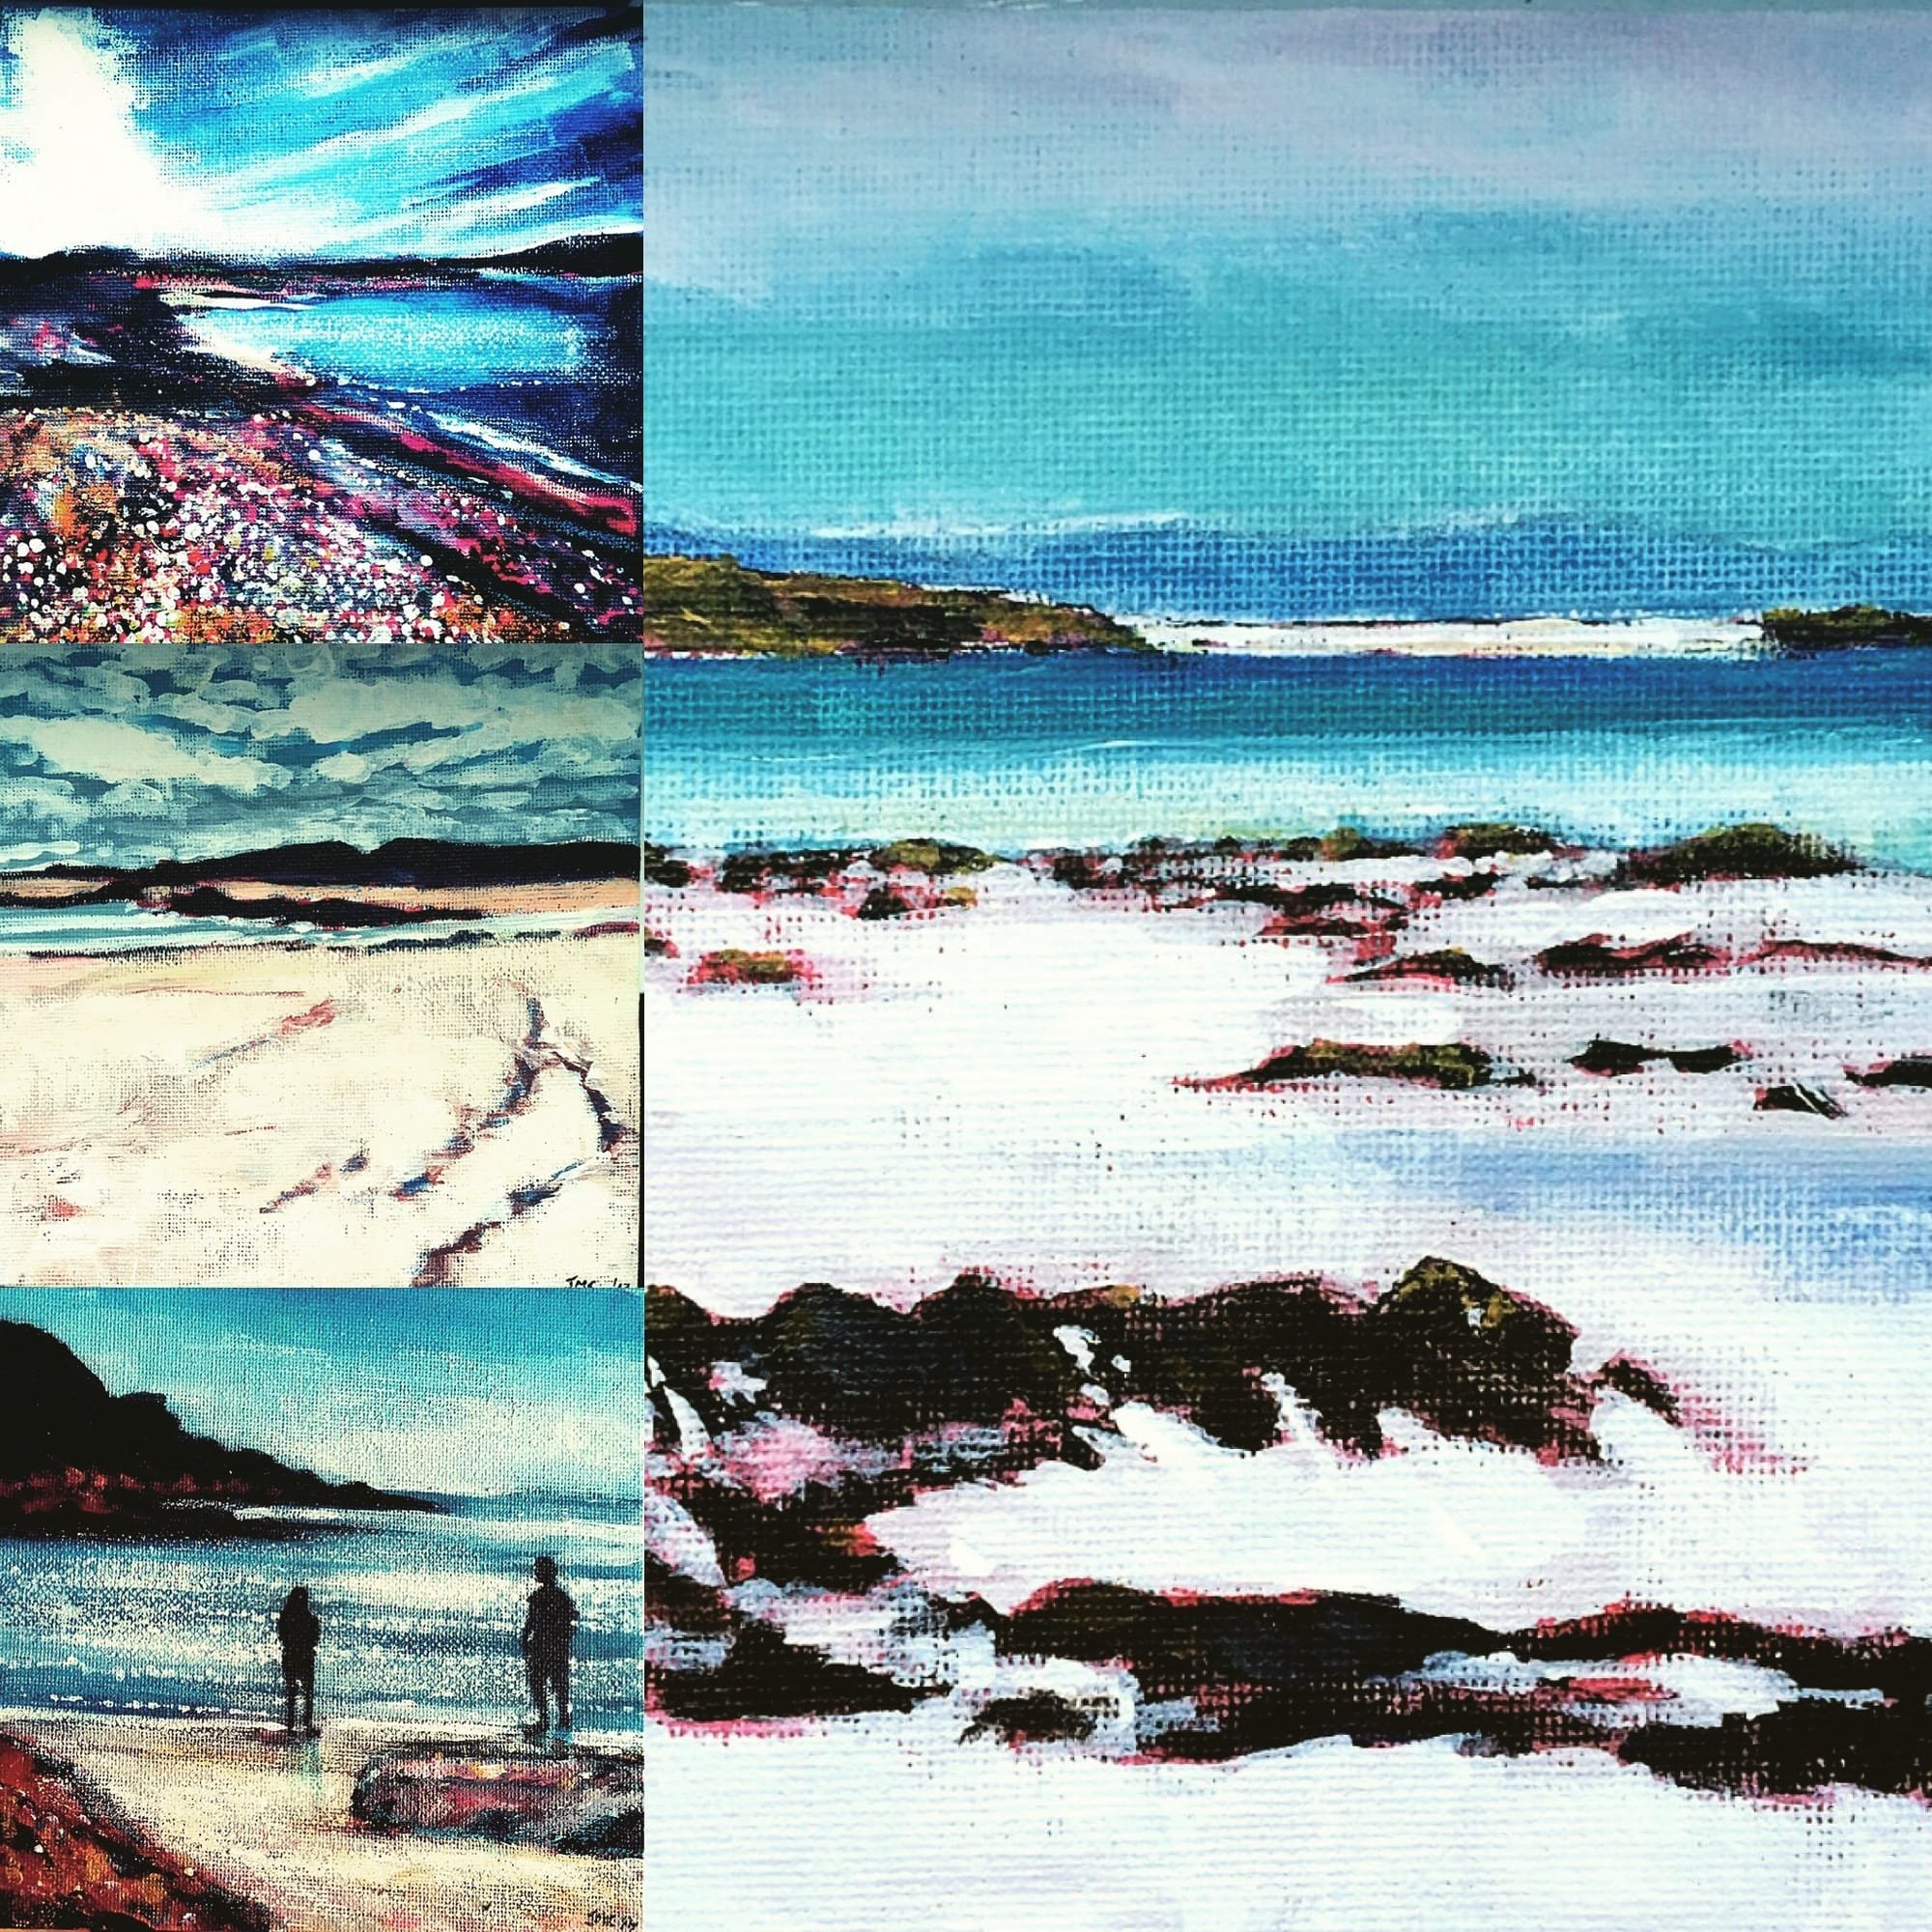 mixed Iona sketches on canvas